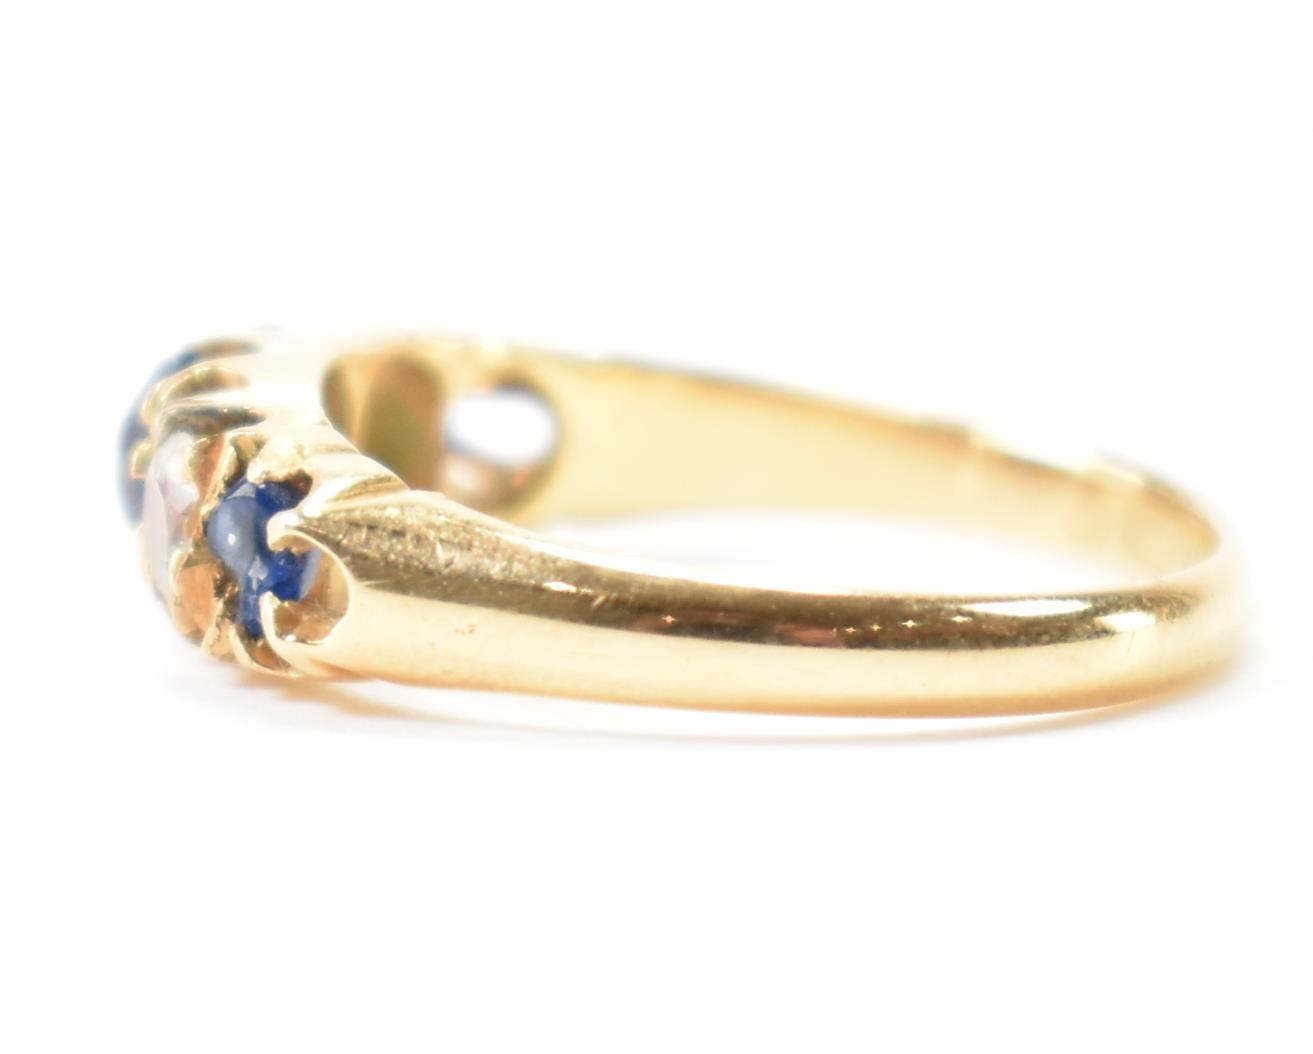 HALLMARKED 18CT GOLD BLUE & WHITE STONE RING - Image 2 of 8